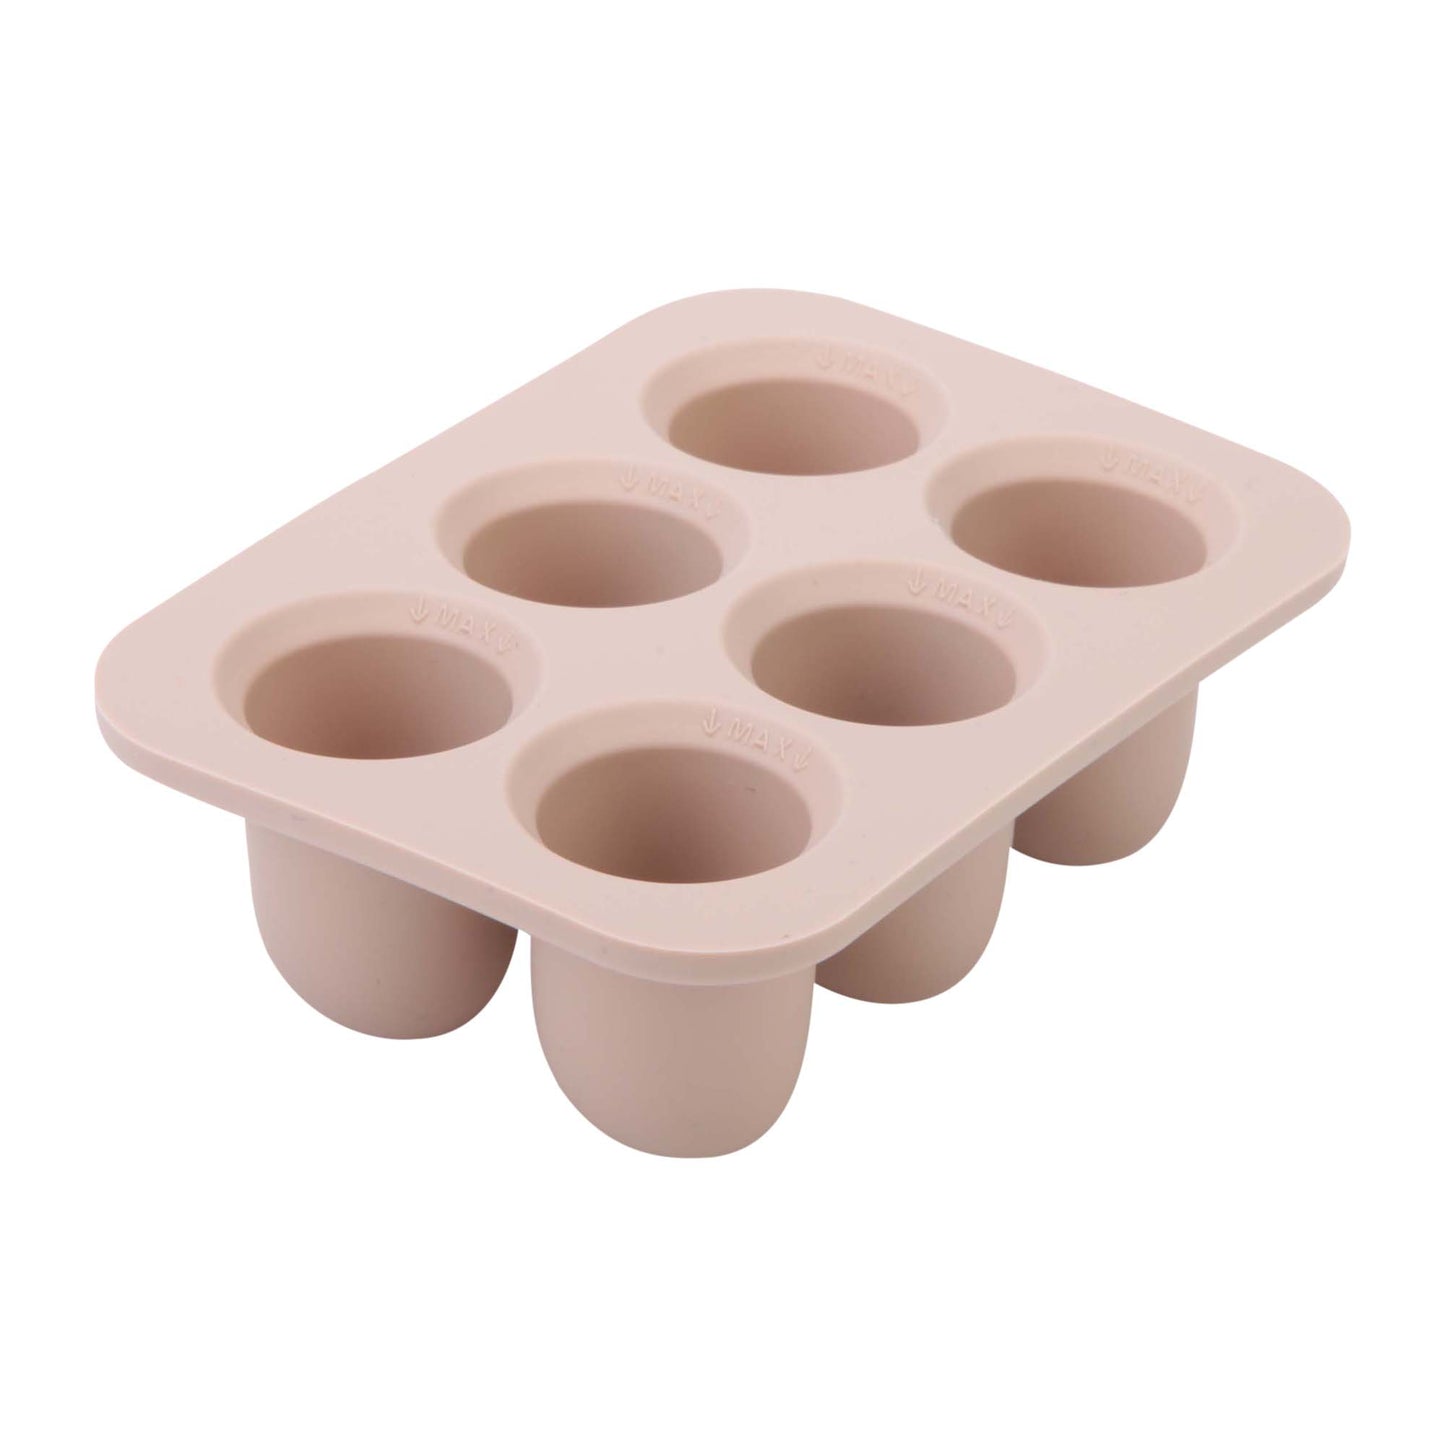 Freezer Trays (Taupe) Set of 2 for Baby Food, Purees, and Breast Milk